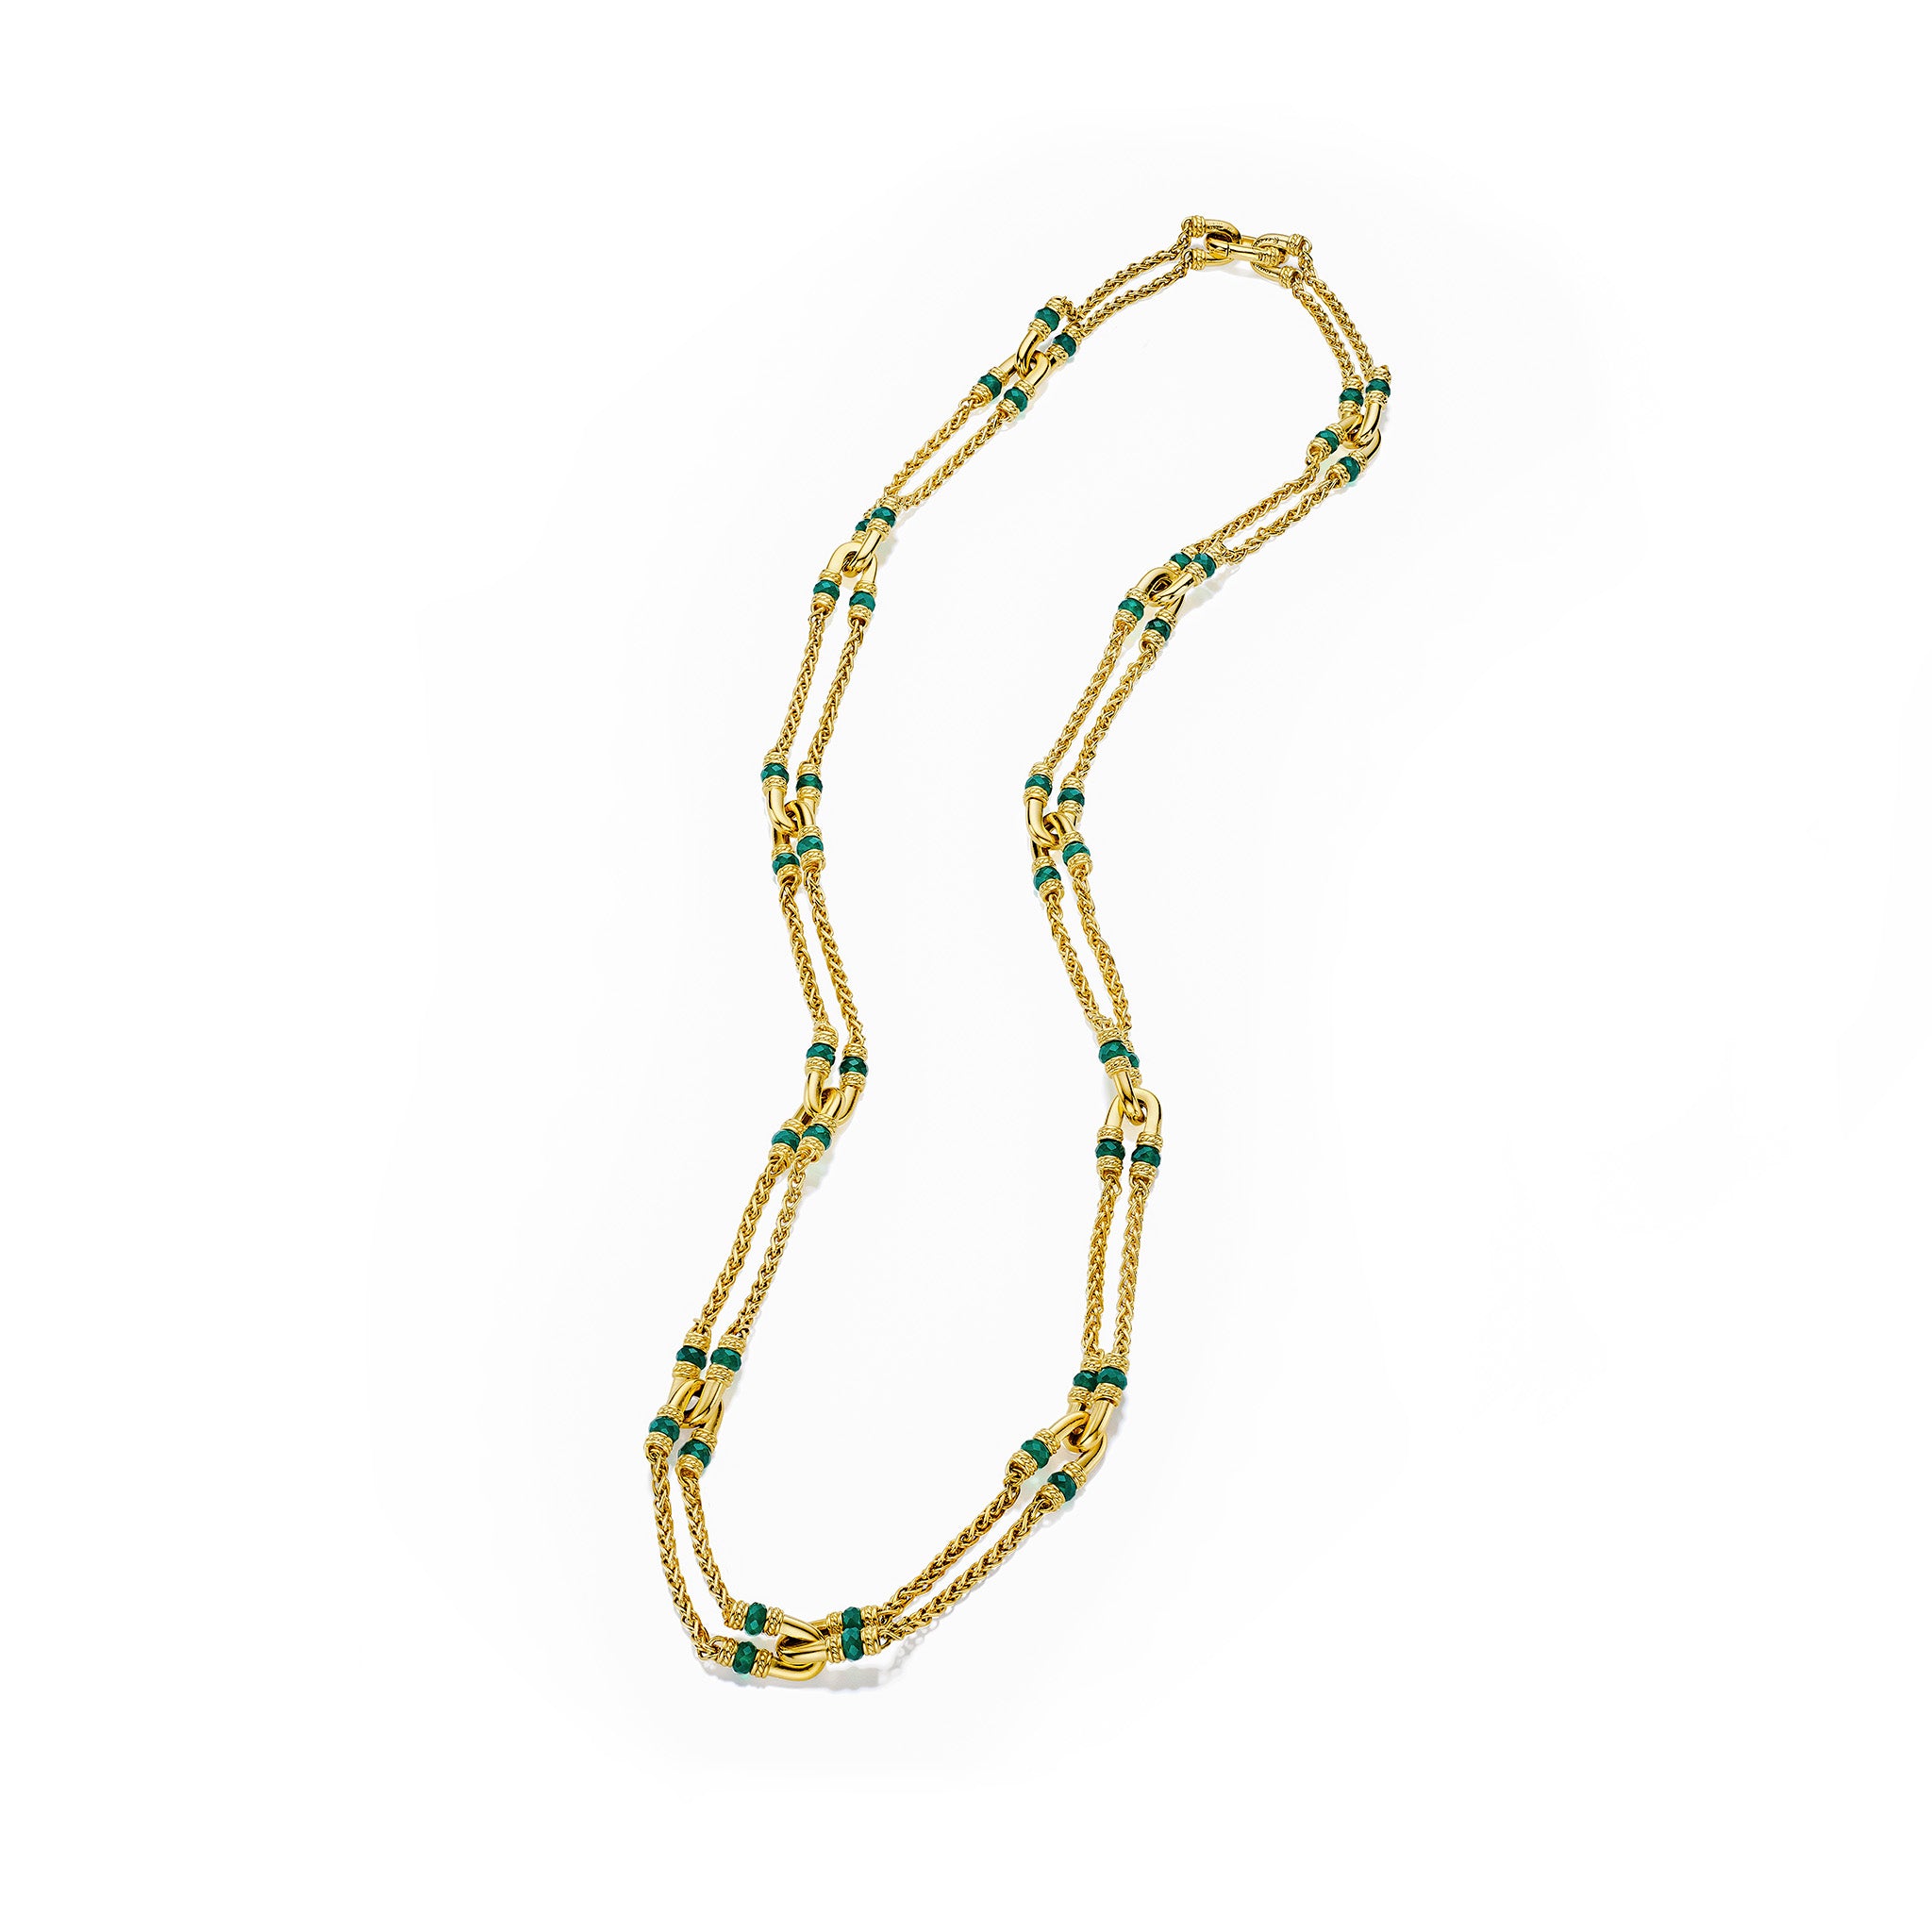 Ocean Reef Statement Necklace with Green Chalcedony in 18K Gold Vermeil